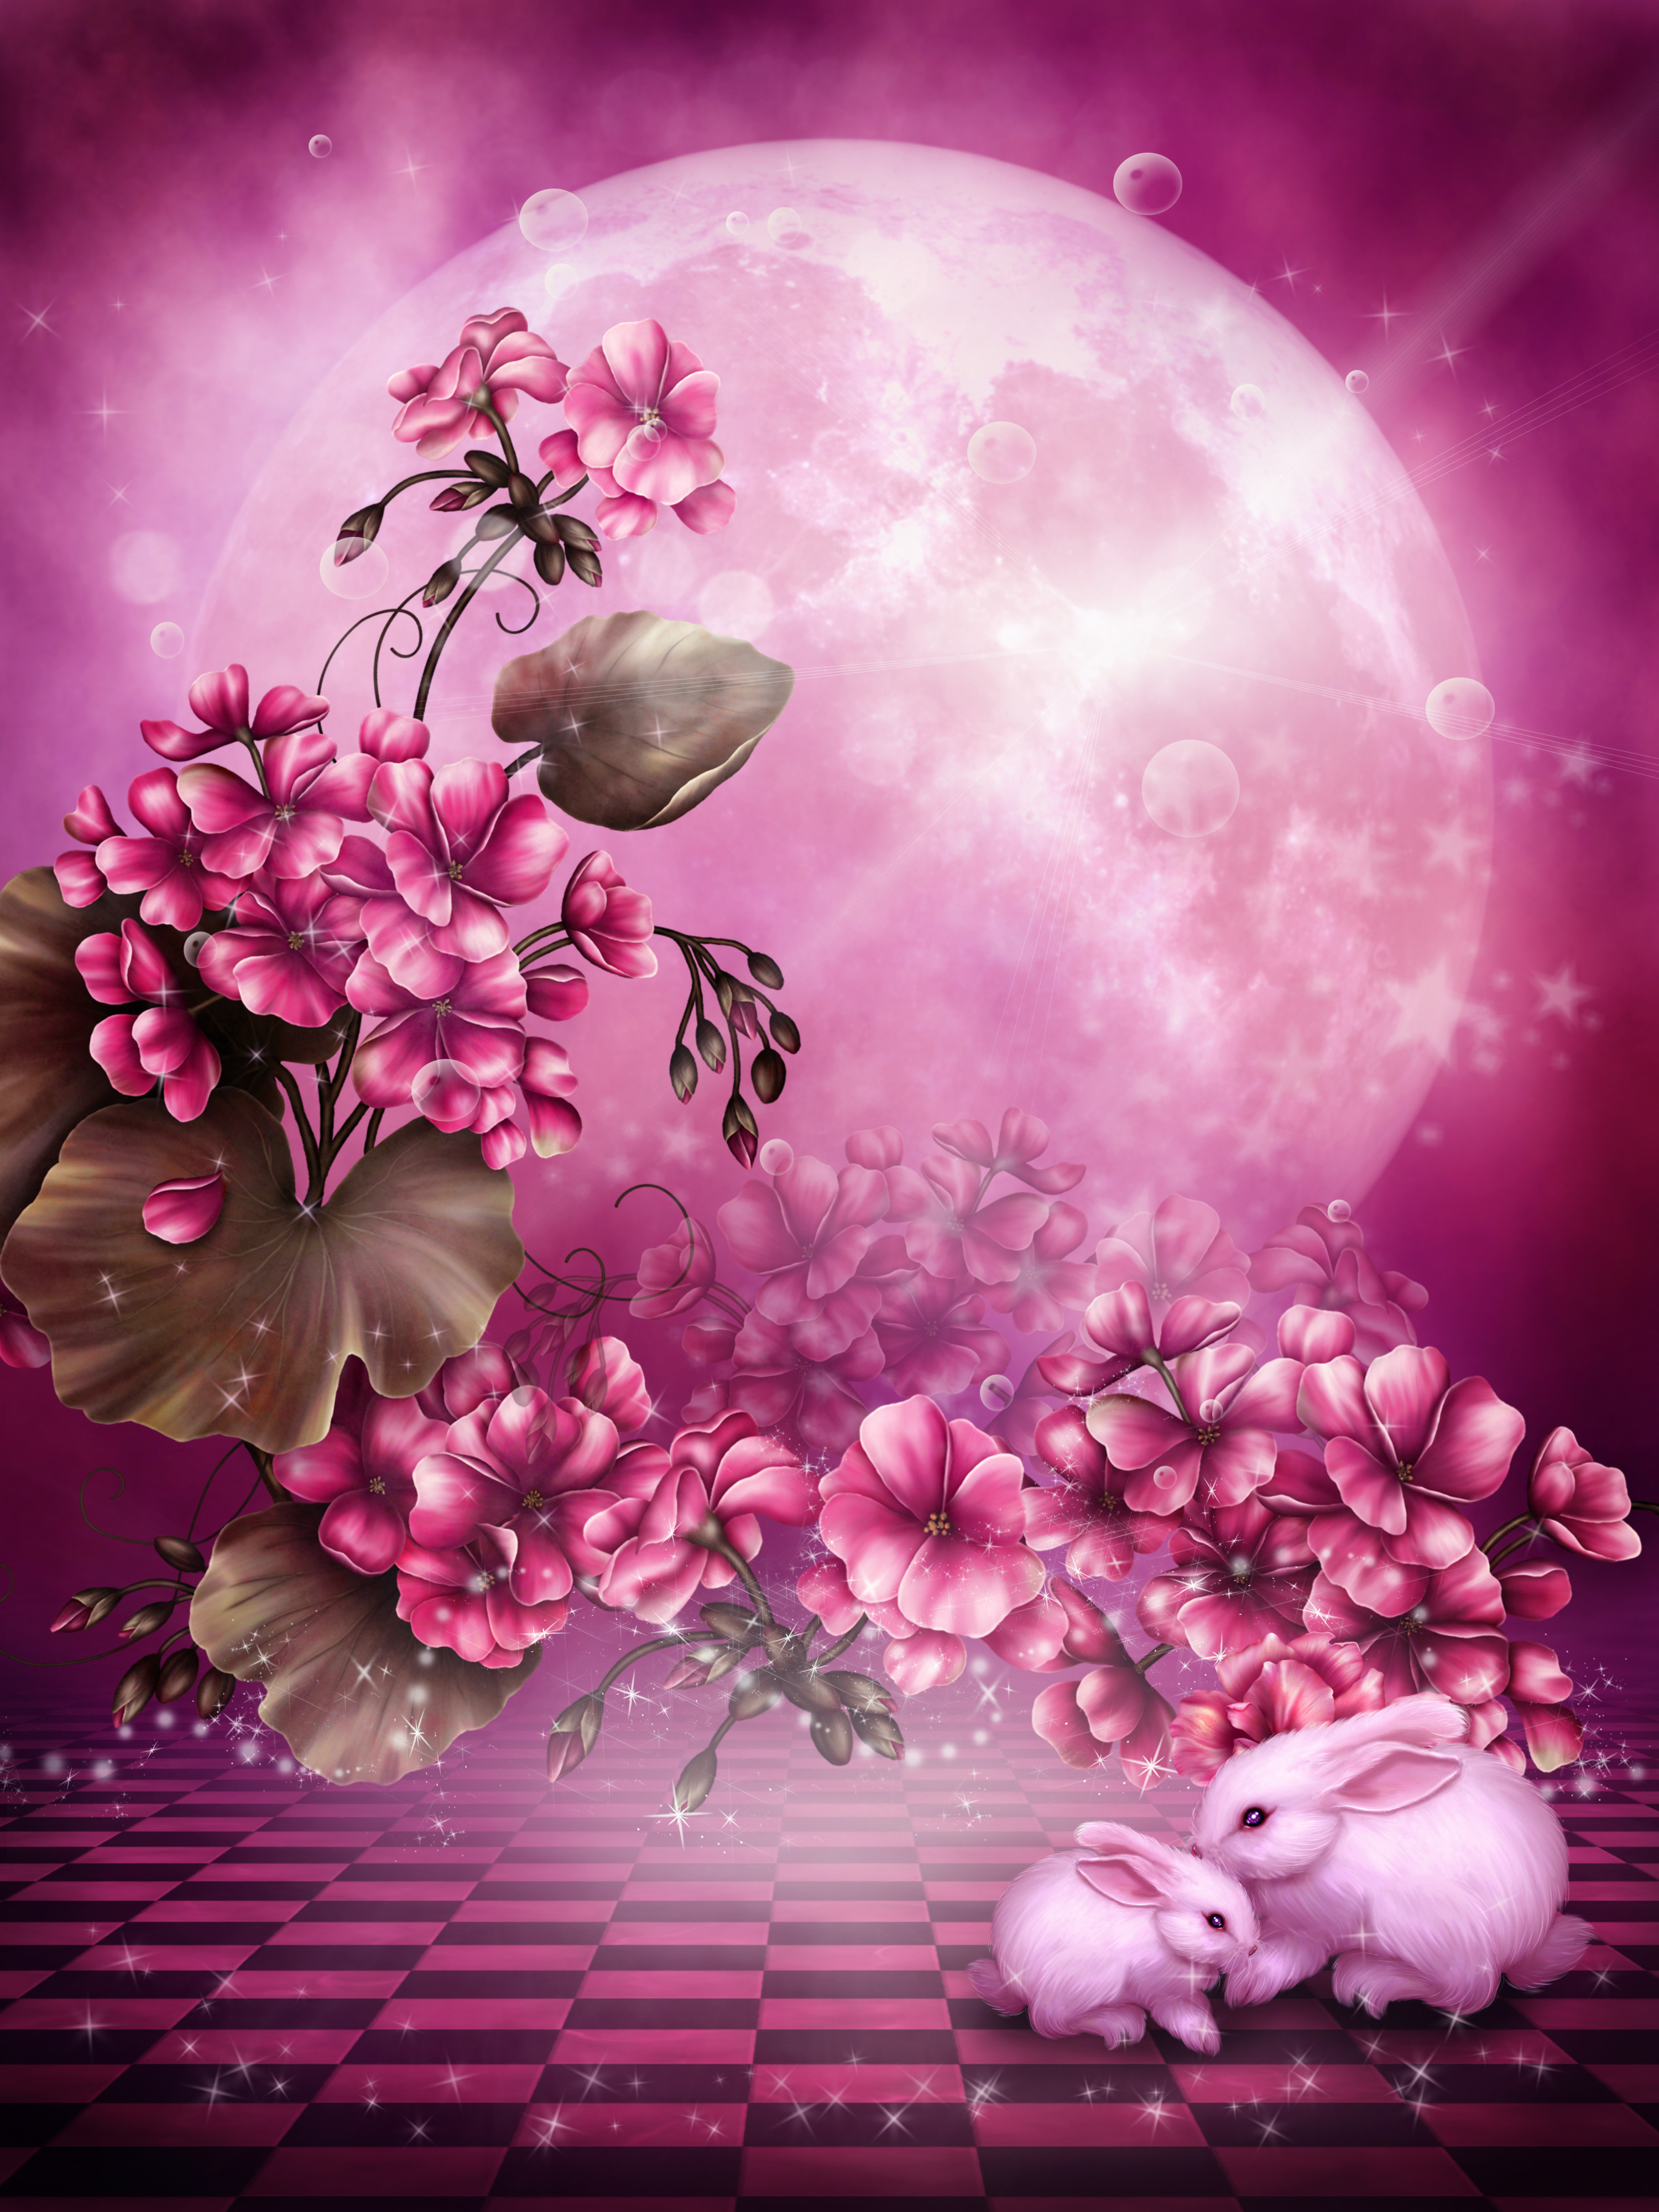 pictures, flowers, plants, rabbits, red mobile wallpaper